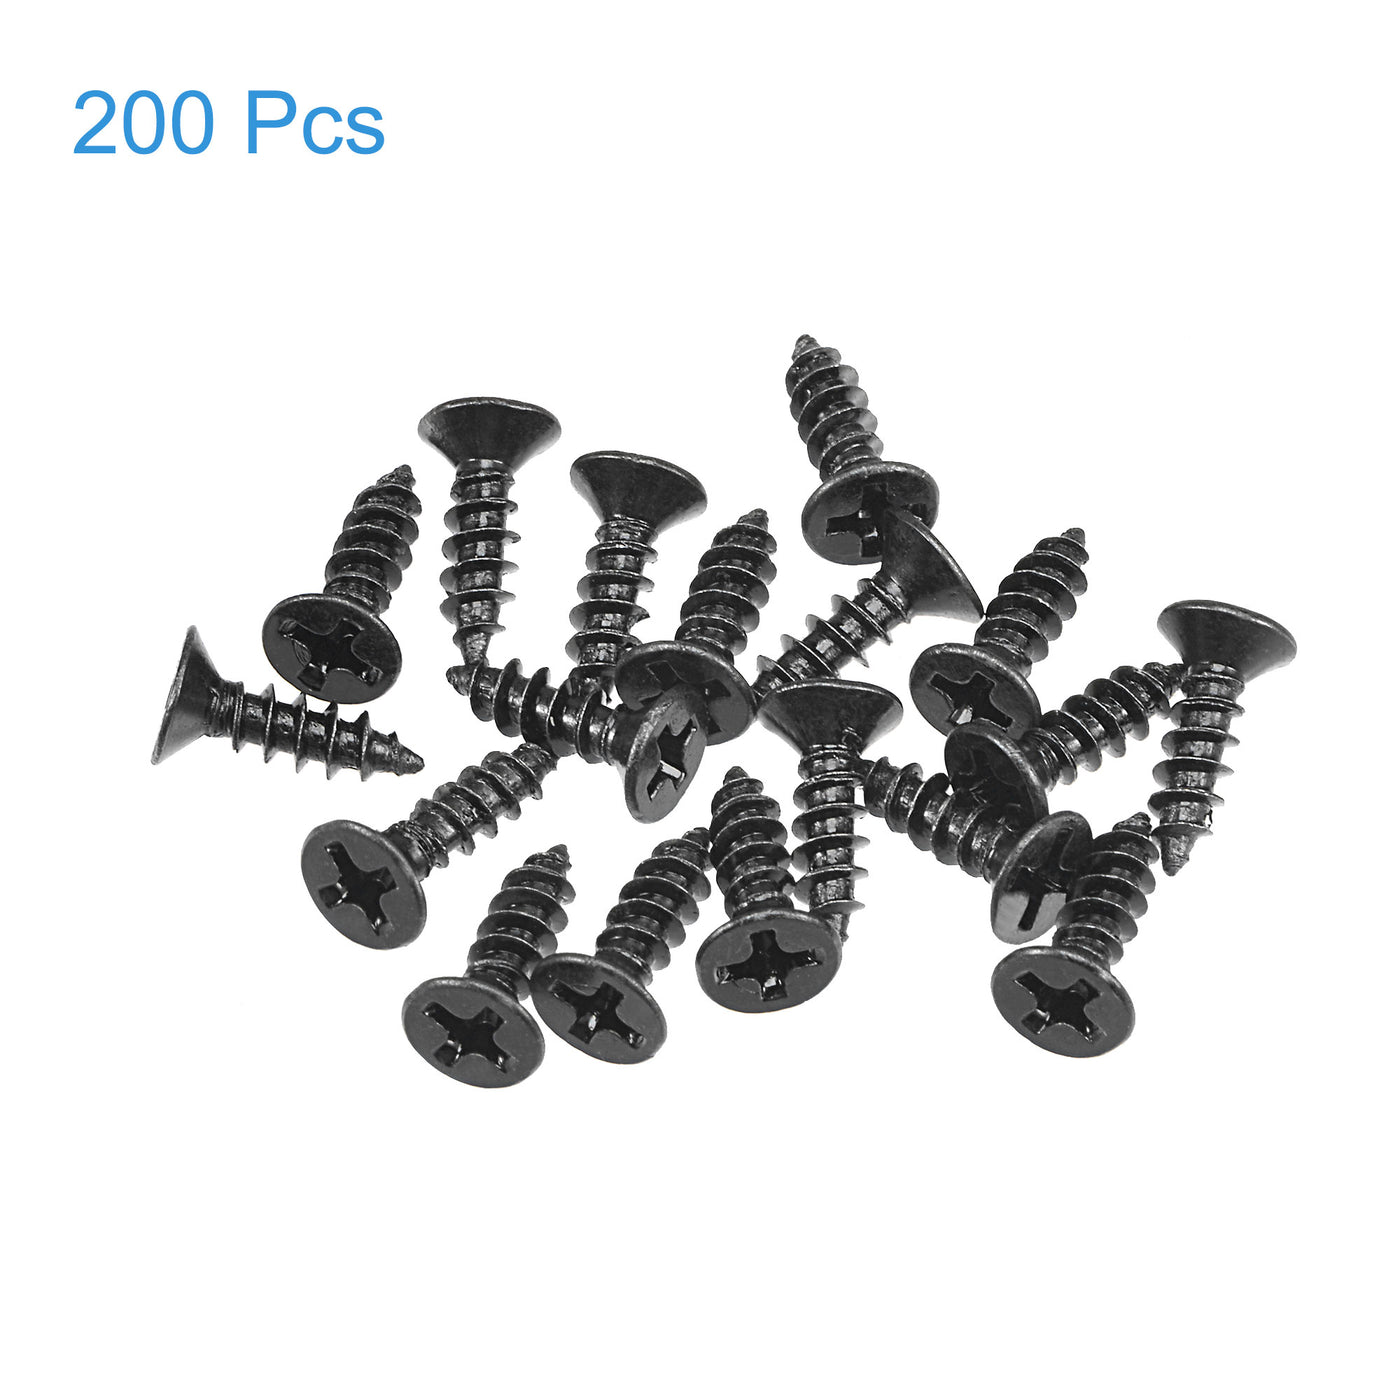 uxcell Uxcell 200pcs M3.5 x 12mm Wood Screws Phillips Flat Head Carbon Steel Self Tapping